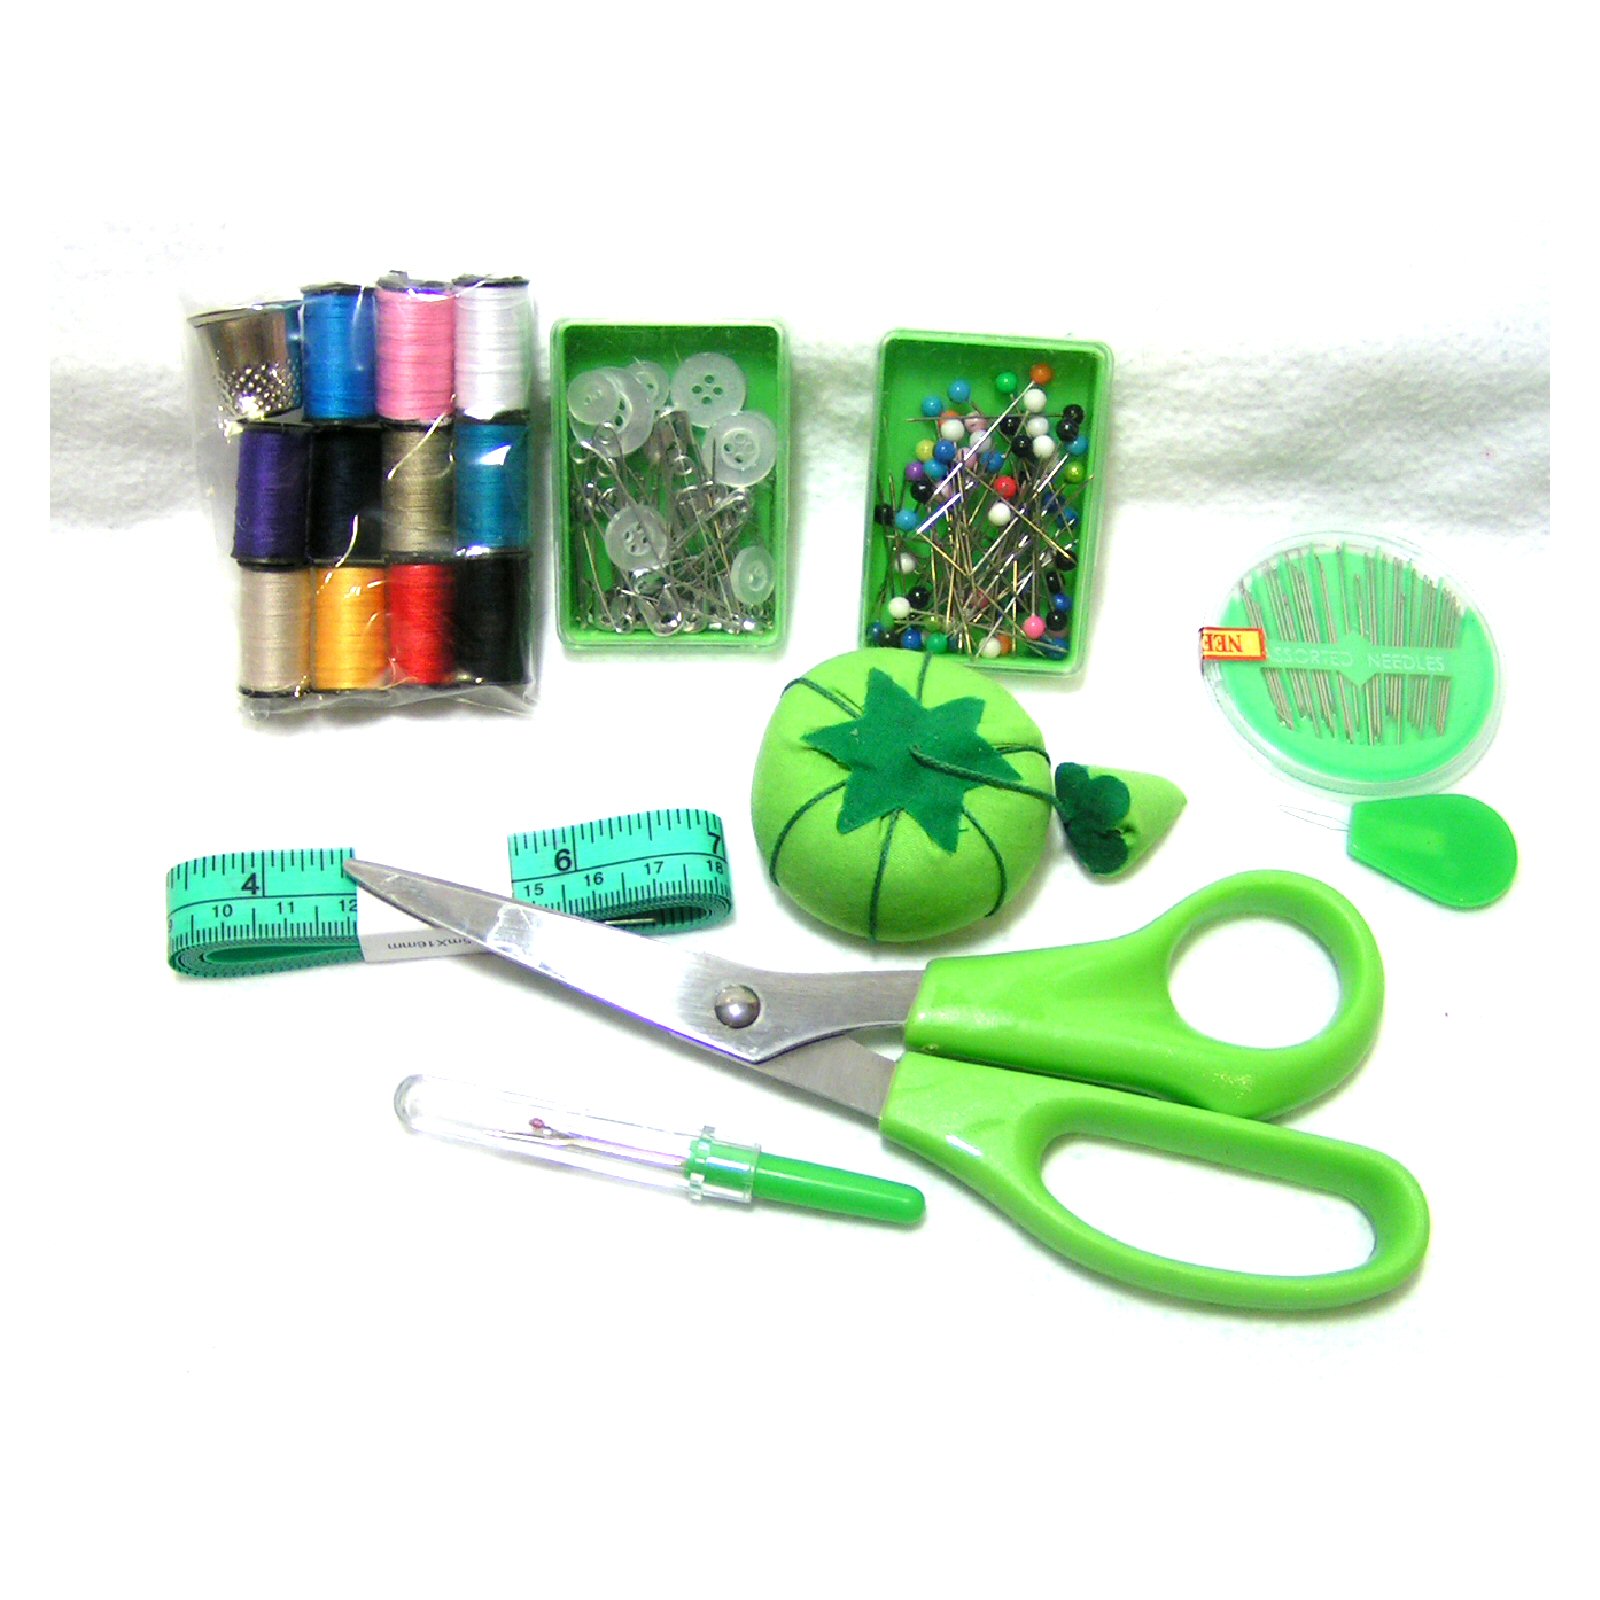 10-pc GREEN Portable Sewing Kit in Pouch for Home & Travel